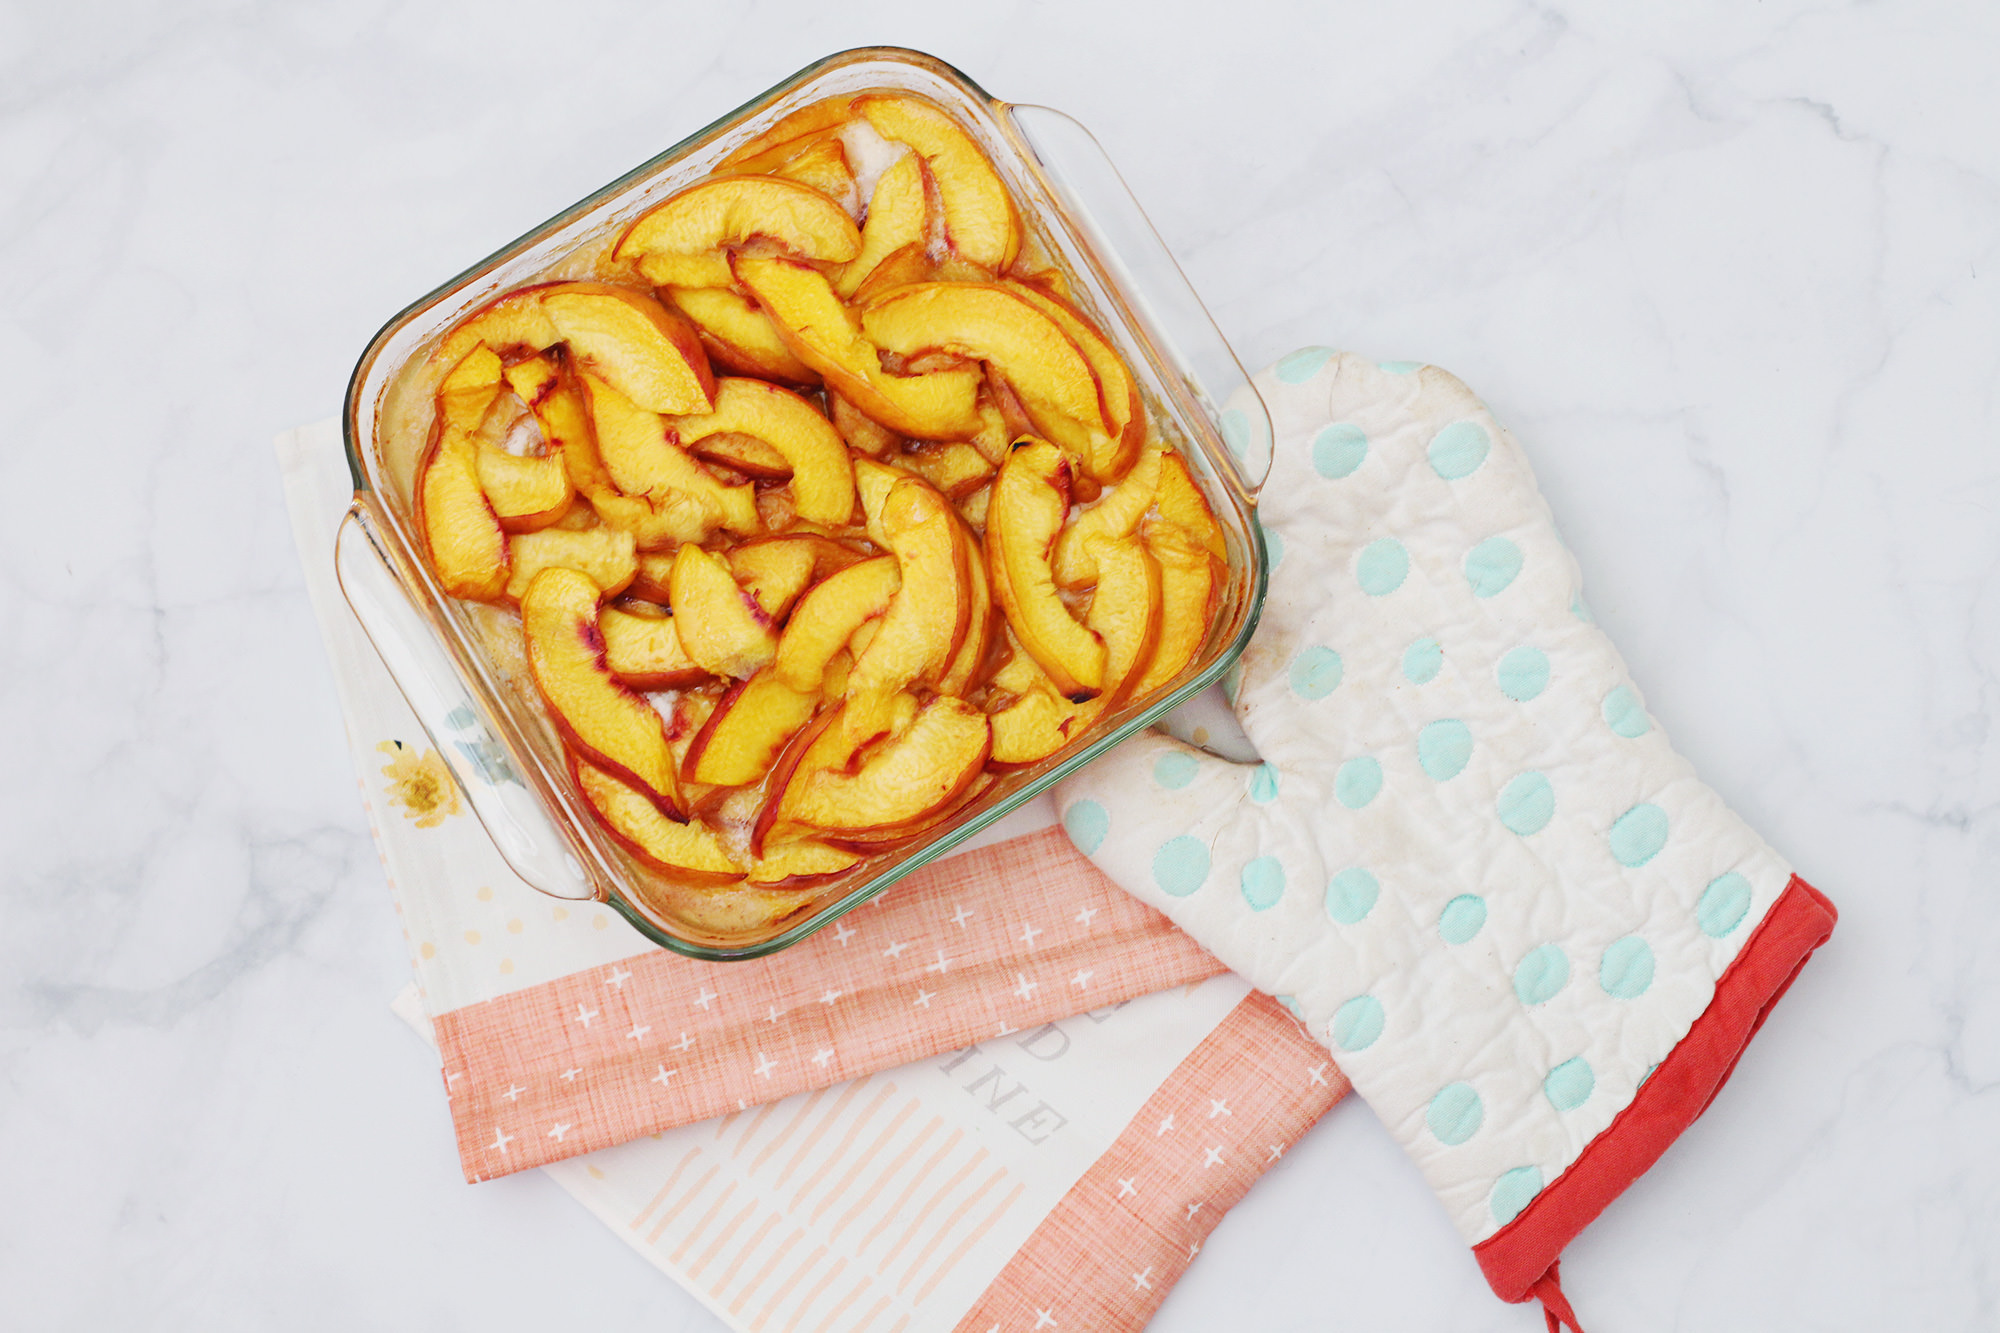 Peach cobbler recipe on Lily & Val Living